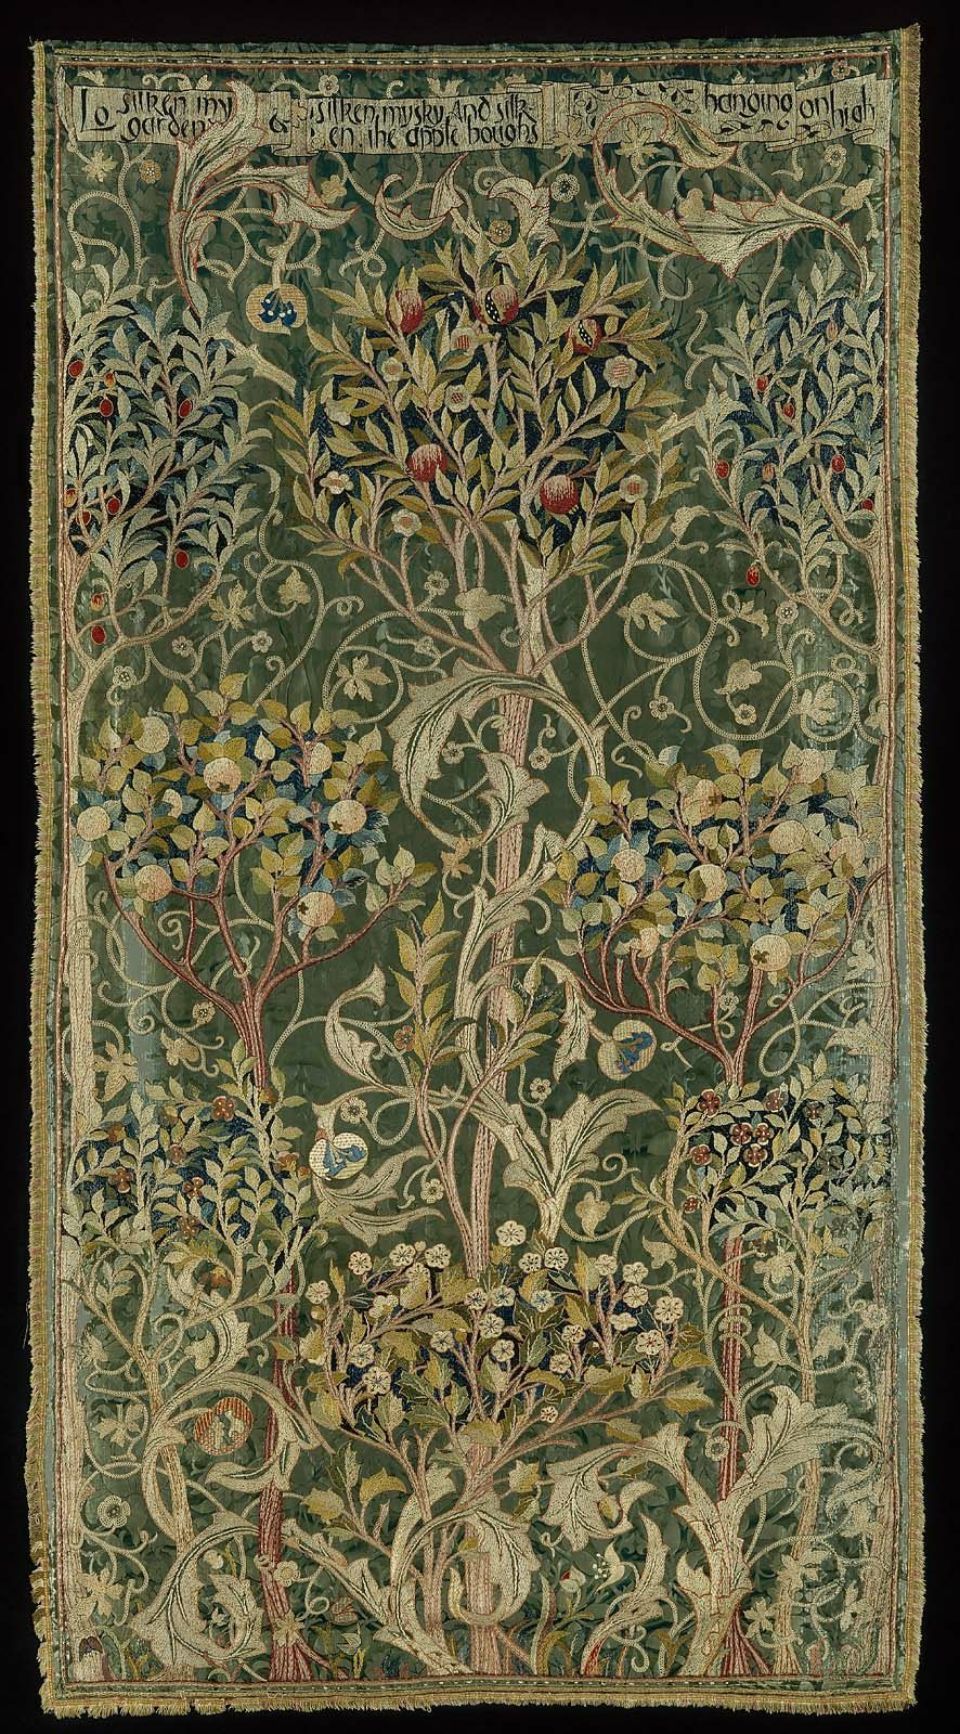 Oak" Portière Designedwilliam Morris For Morris & Co With Regard To 2017 Blended Fabric Unicorn Captive And Unicorn Hunt Wall Hangings (View 9 of 20)